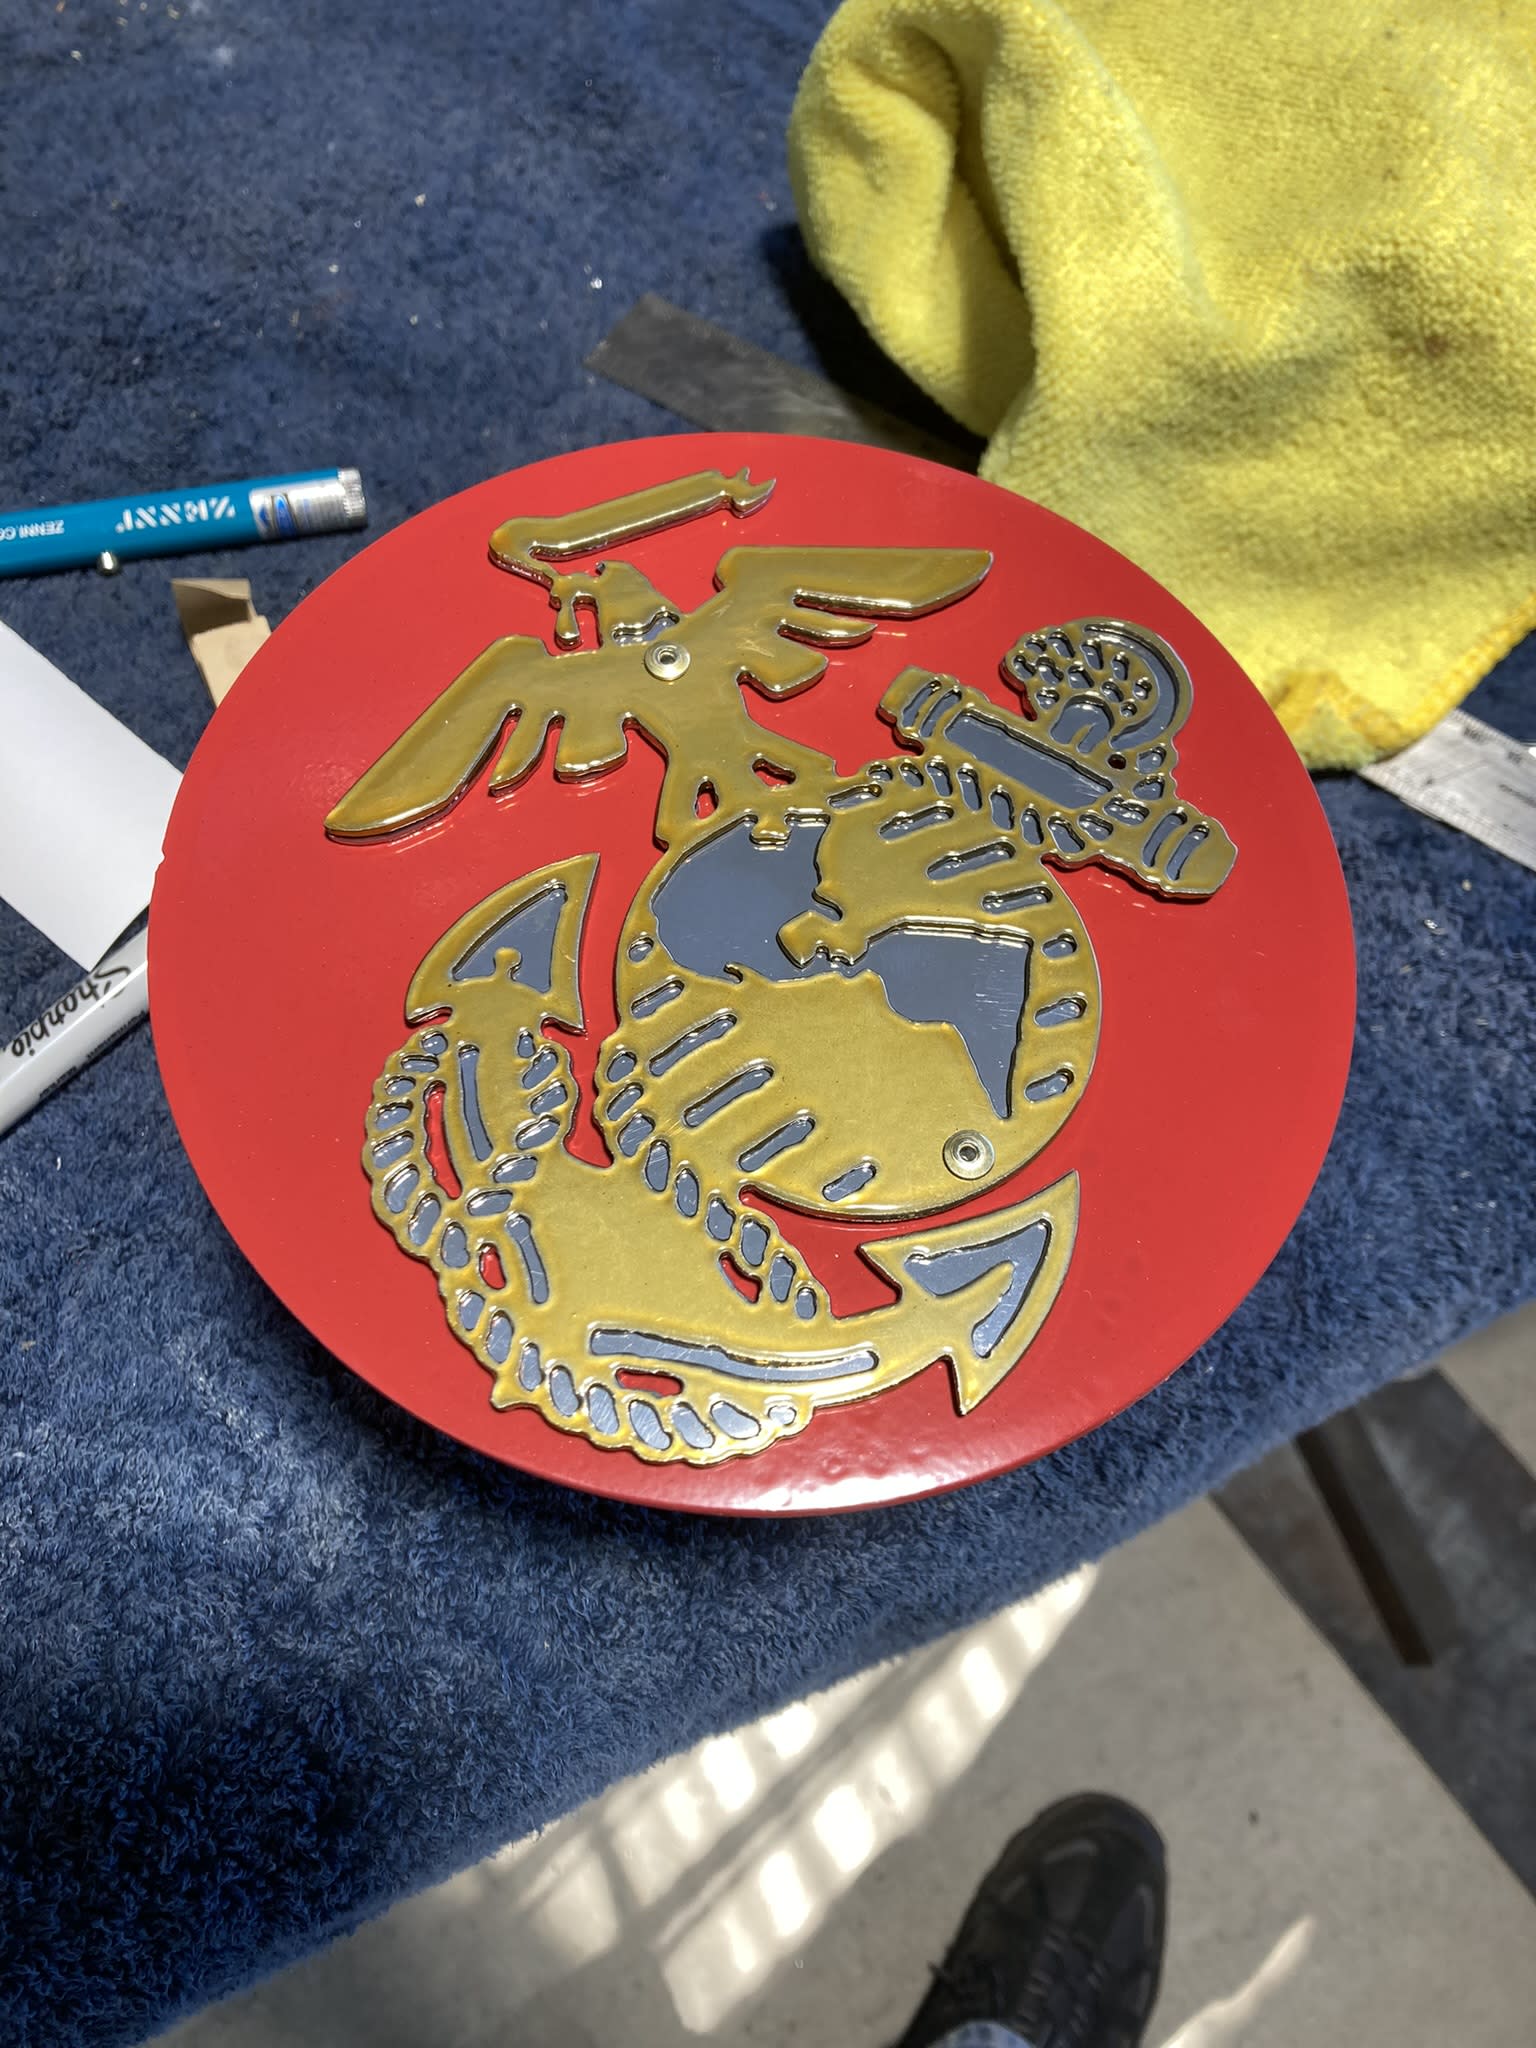 US Marine Corps V2 - Receiver Hitch Covers - Mad Taco Metal